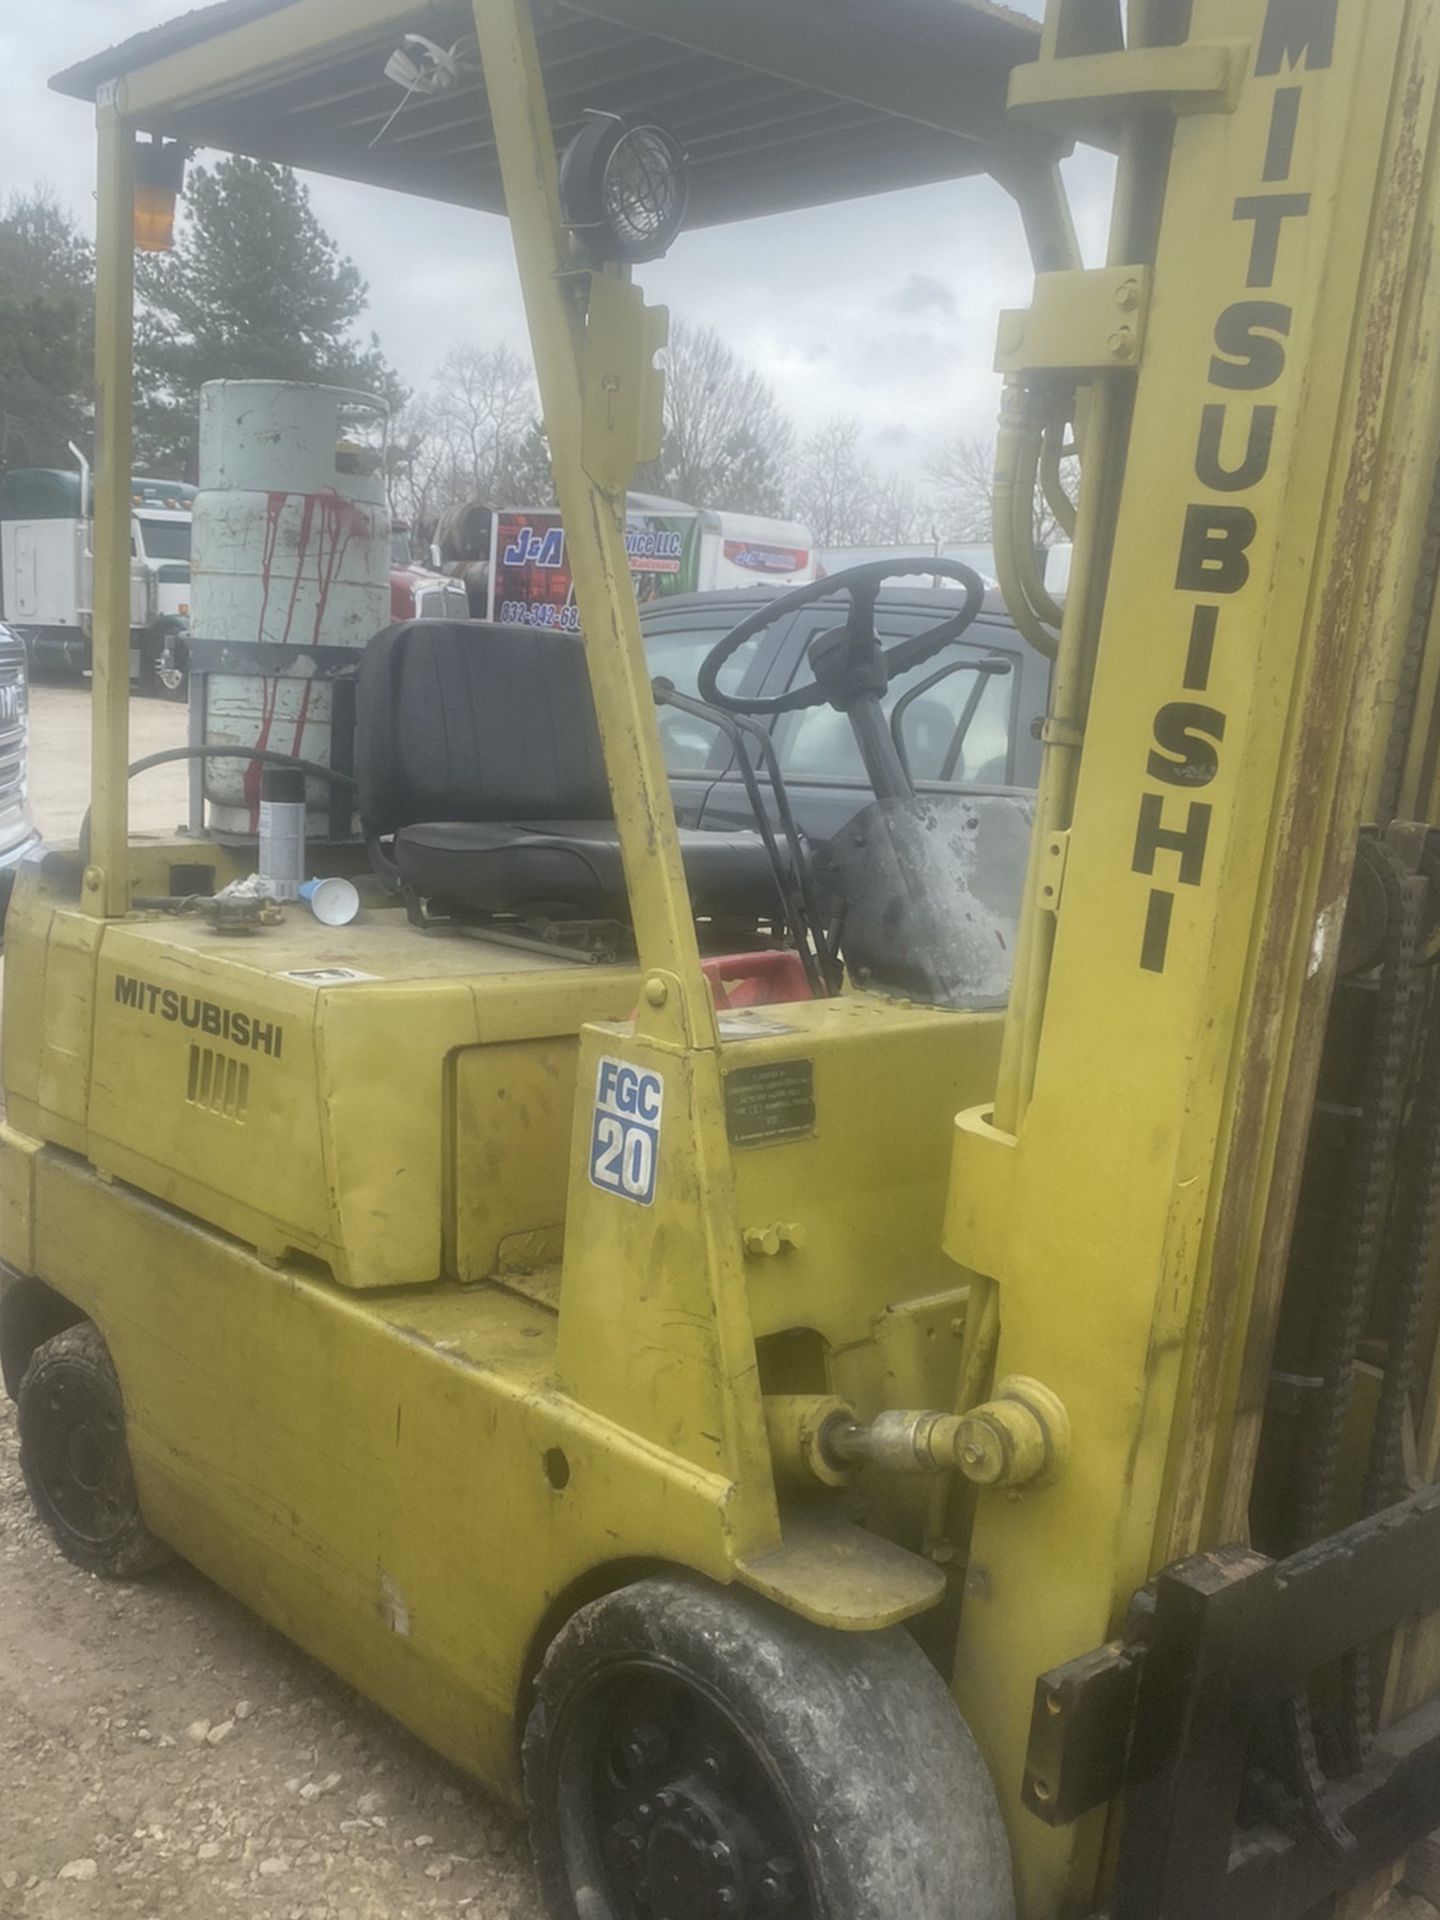 Mids 90s Mitsubishi forklift fgc20 4000 lb capacity warehouse propane 2stage mass it does not move selling as is condition I’m not a mechanic